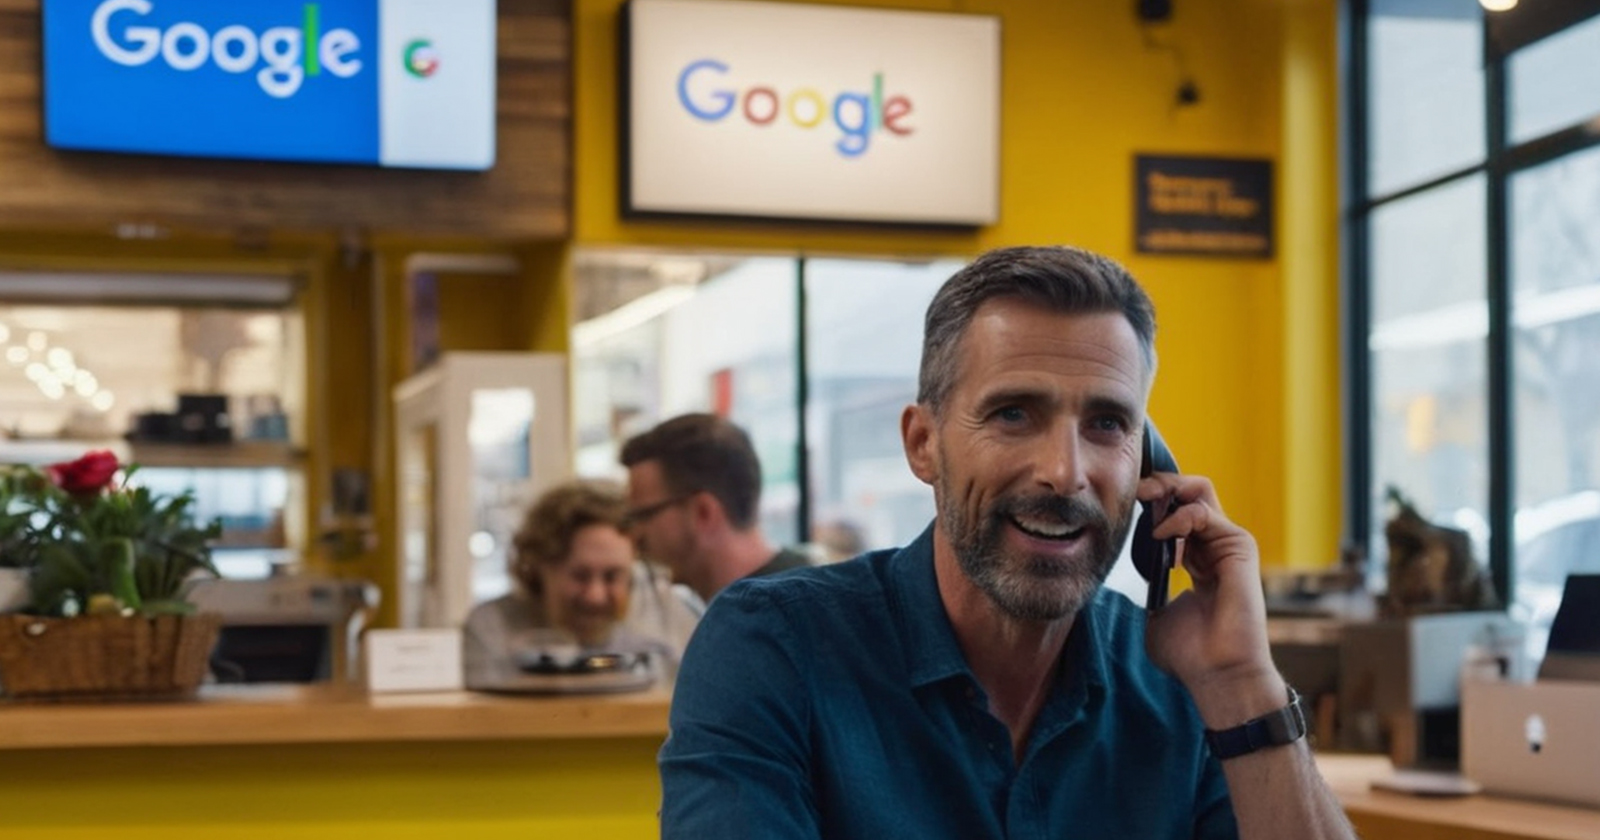 a man talking to phone in google shop